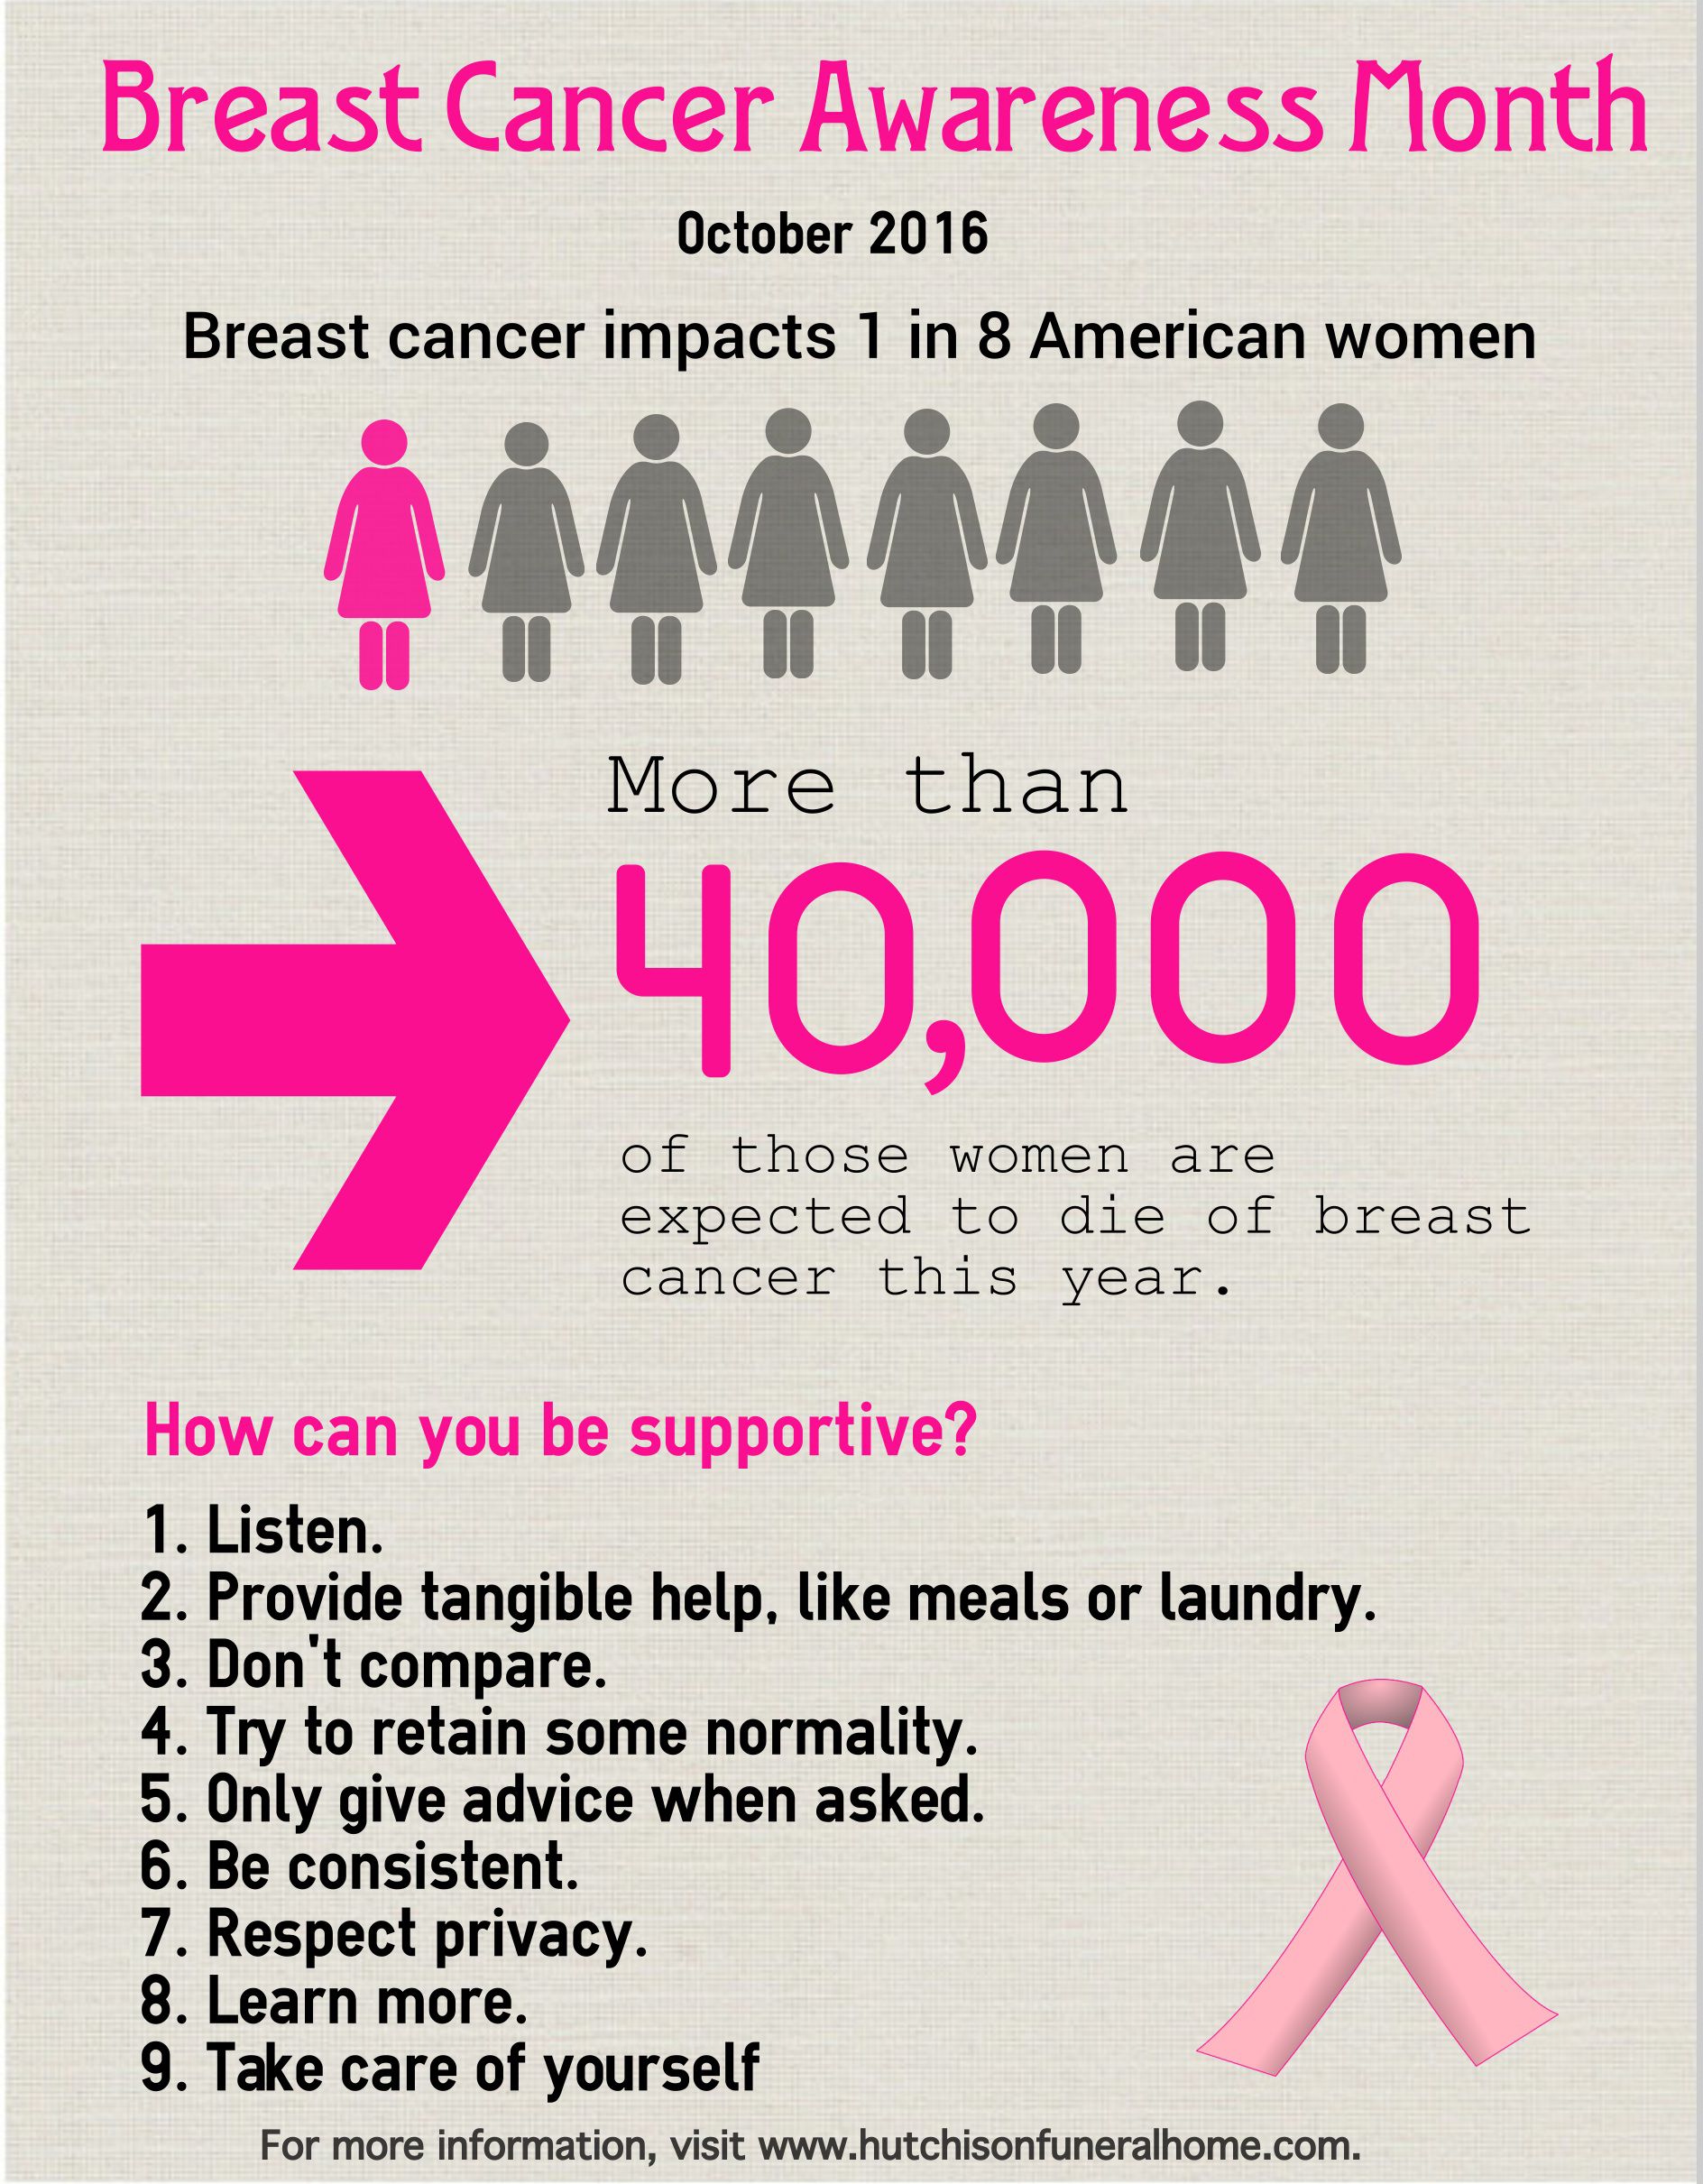 How To Support A Loved One With Breast Cancer Diagnosis?